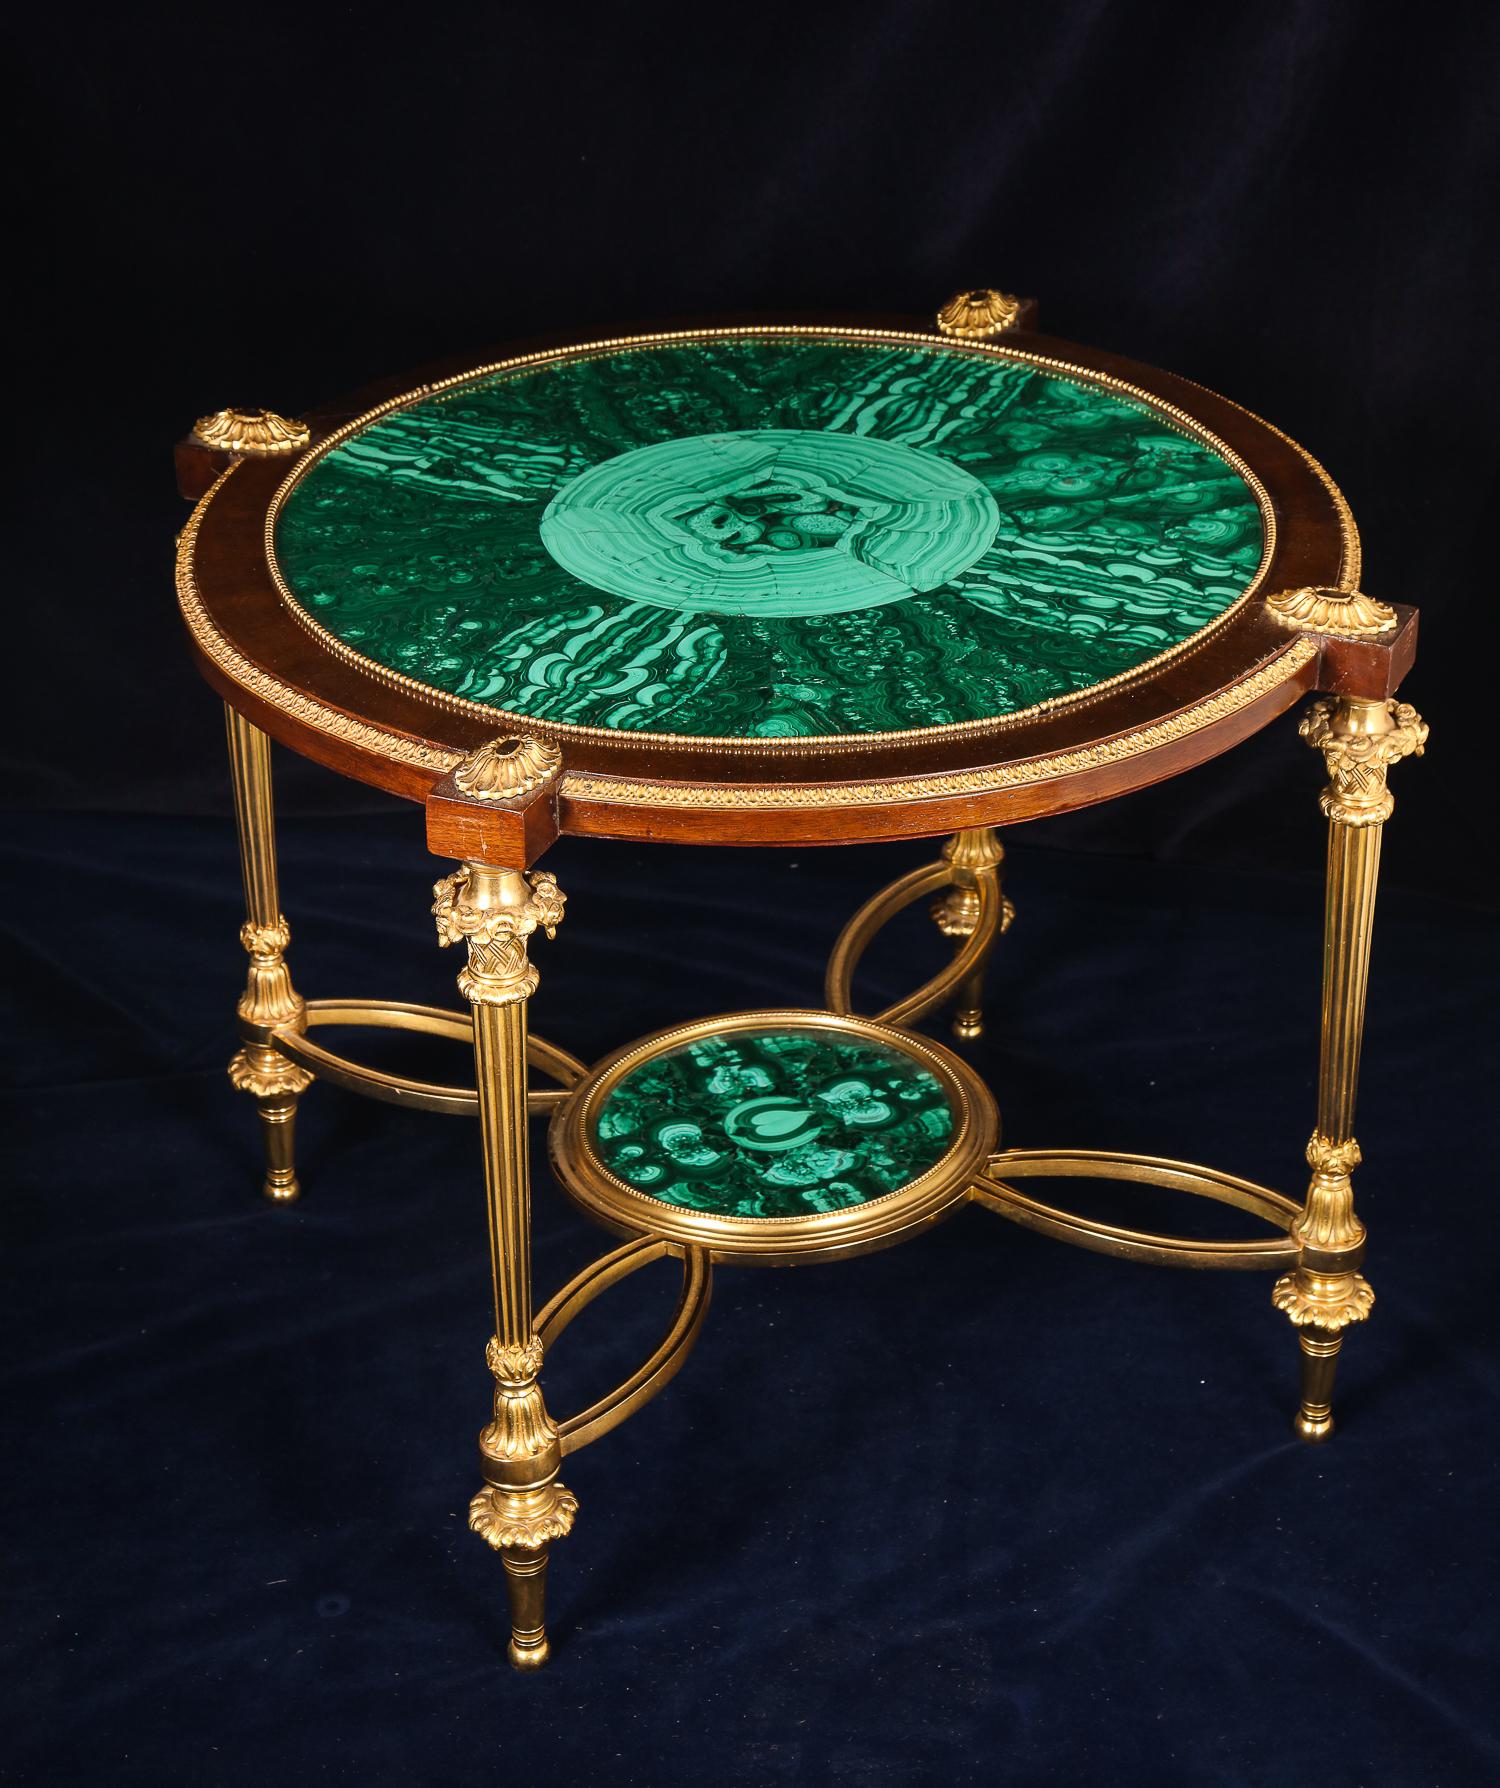 A fine circular form French Louis XVI style gilt bronze, wood and malachite coffee or side table.